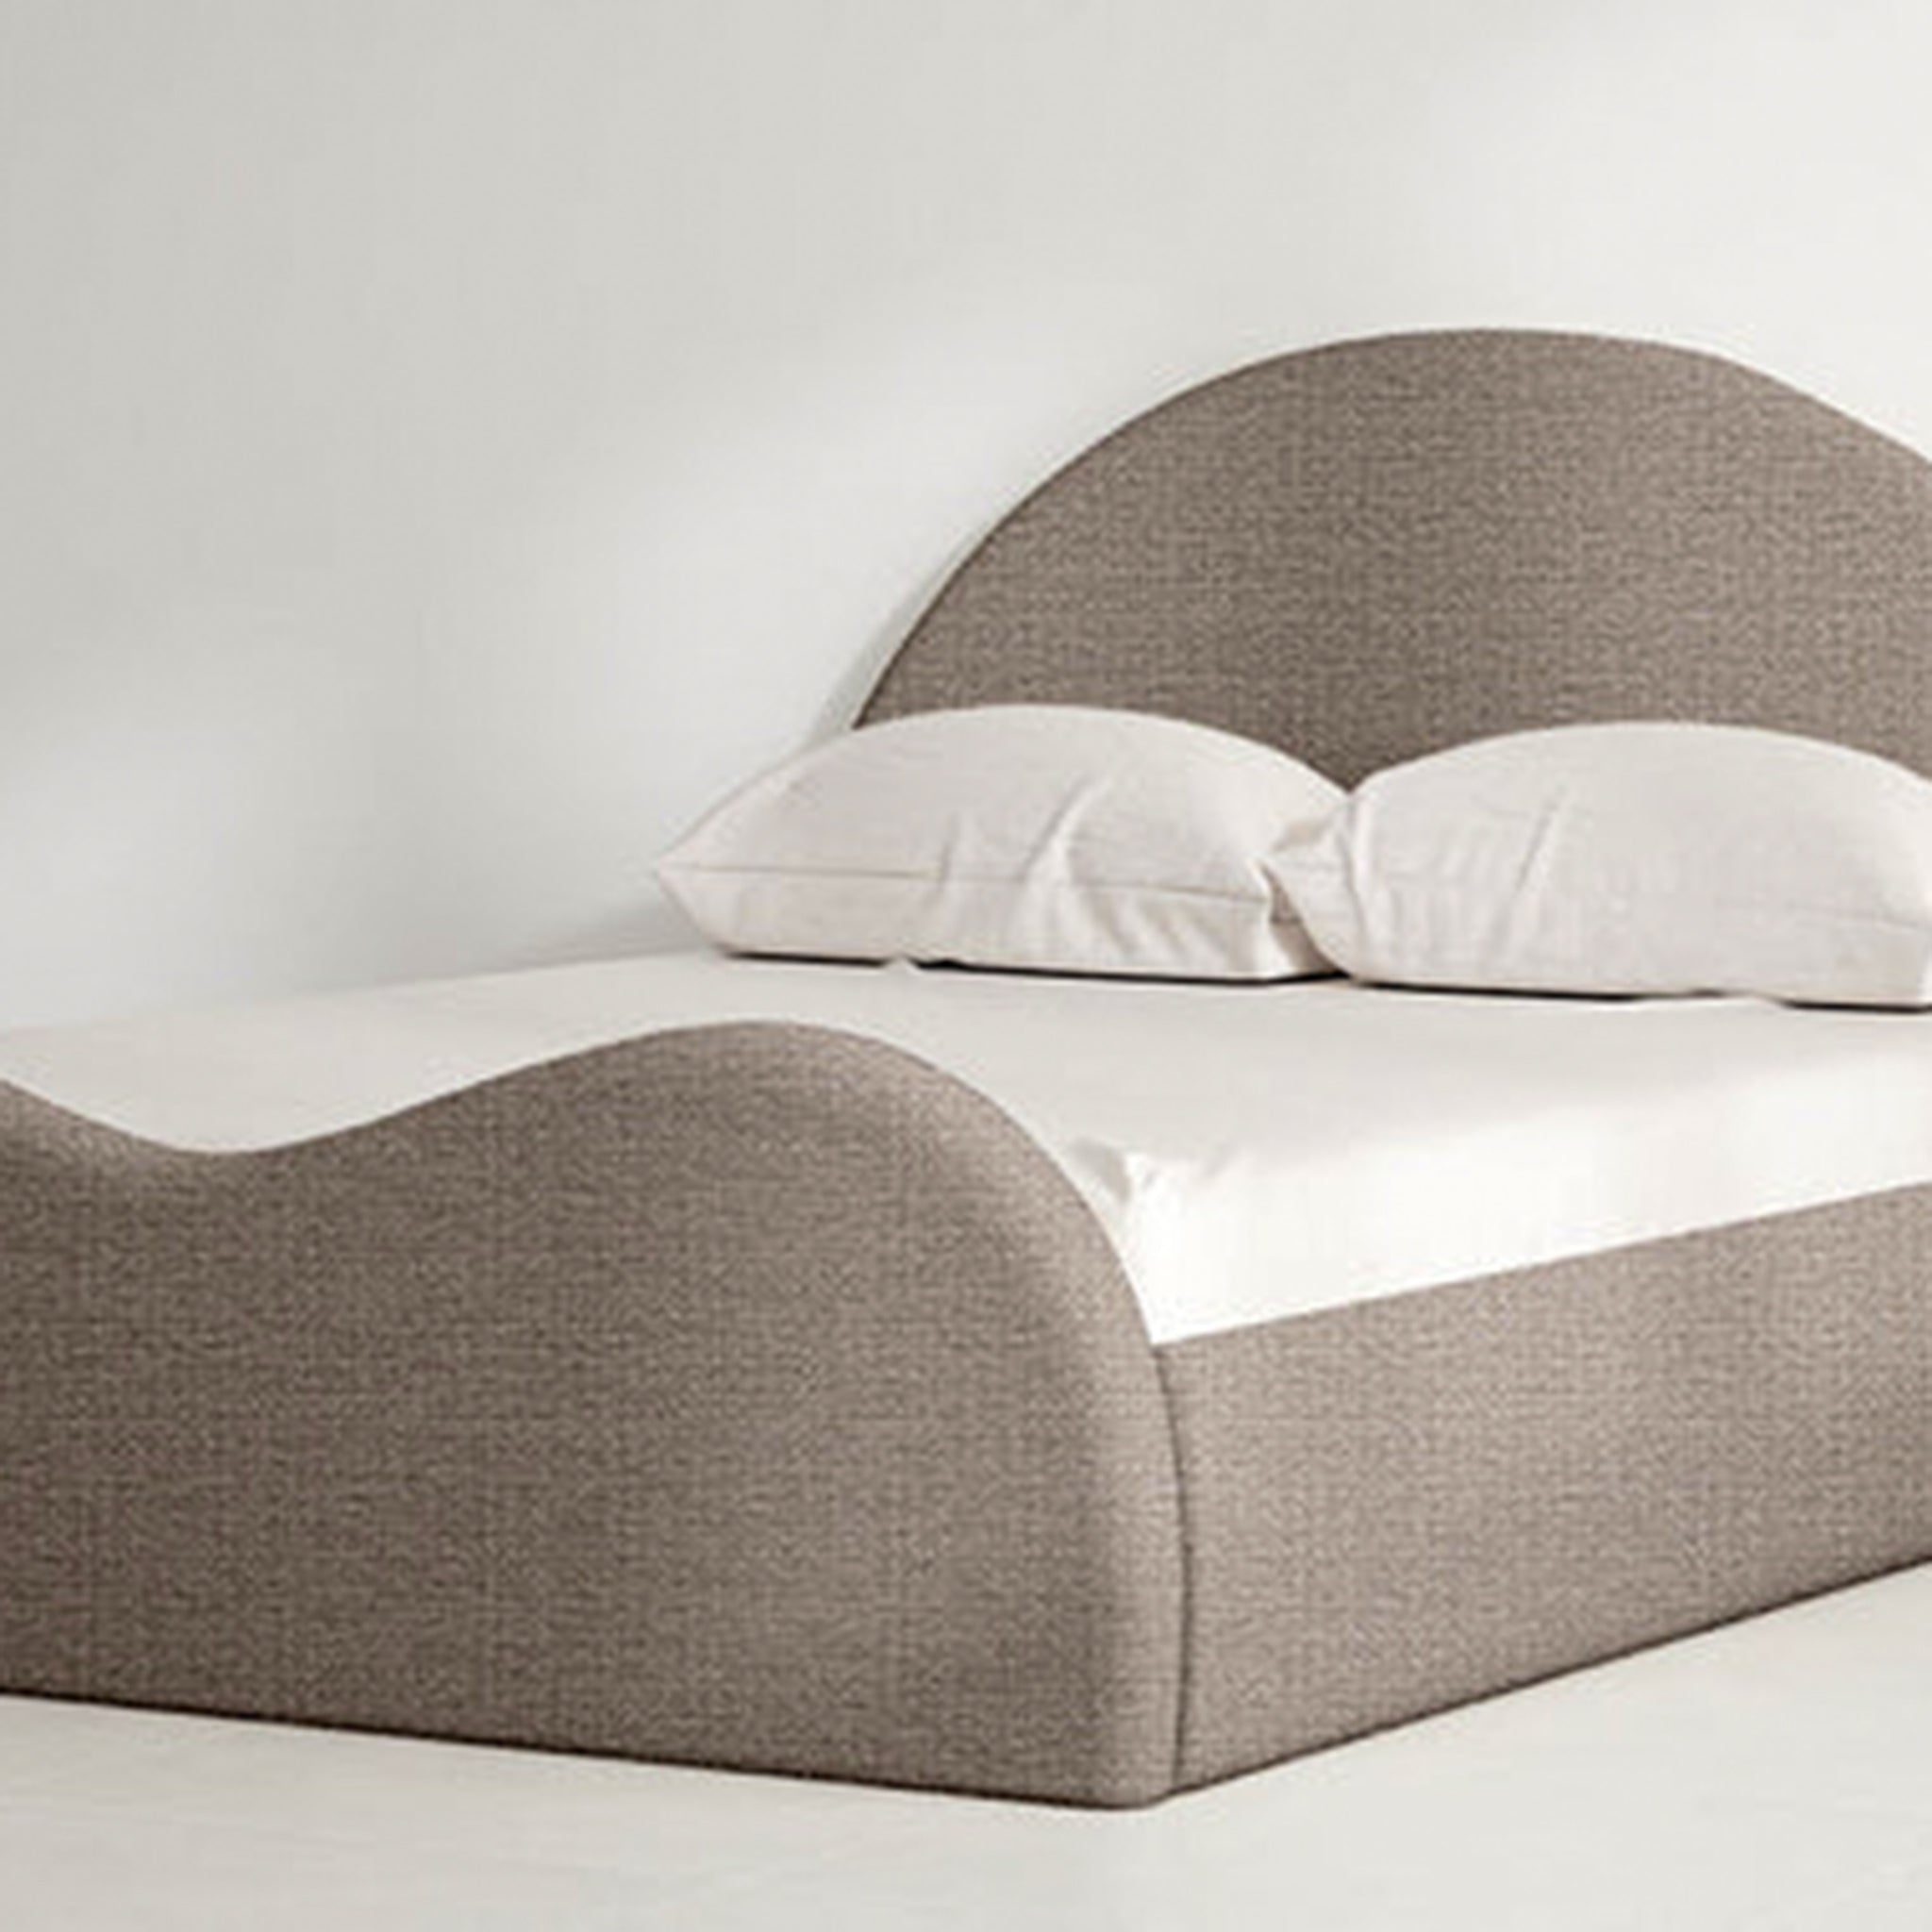 The Dolly Bed in soothing gray, perfect for contemporary decor.